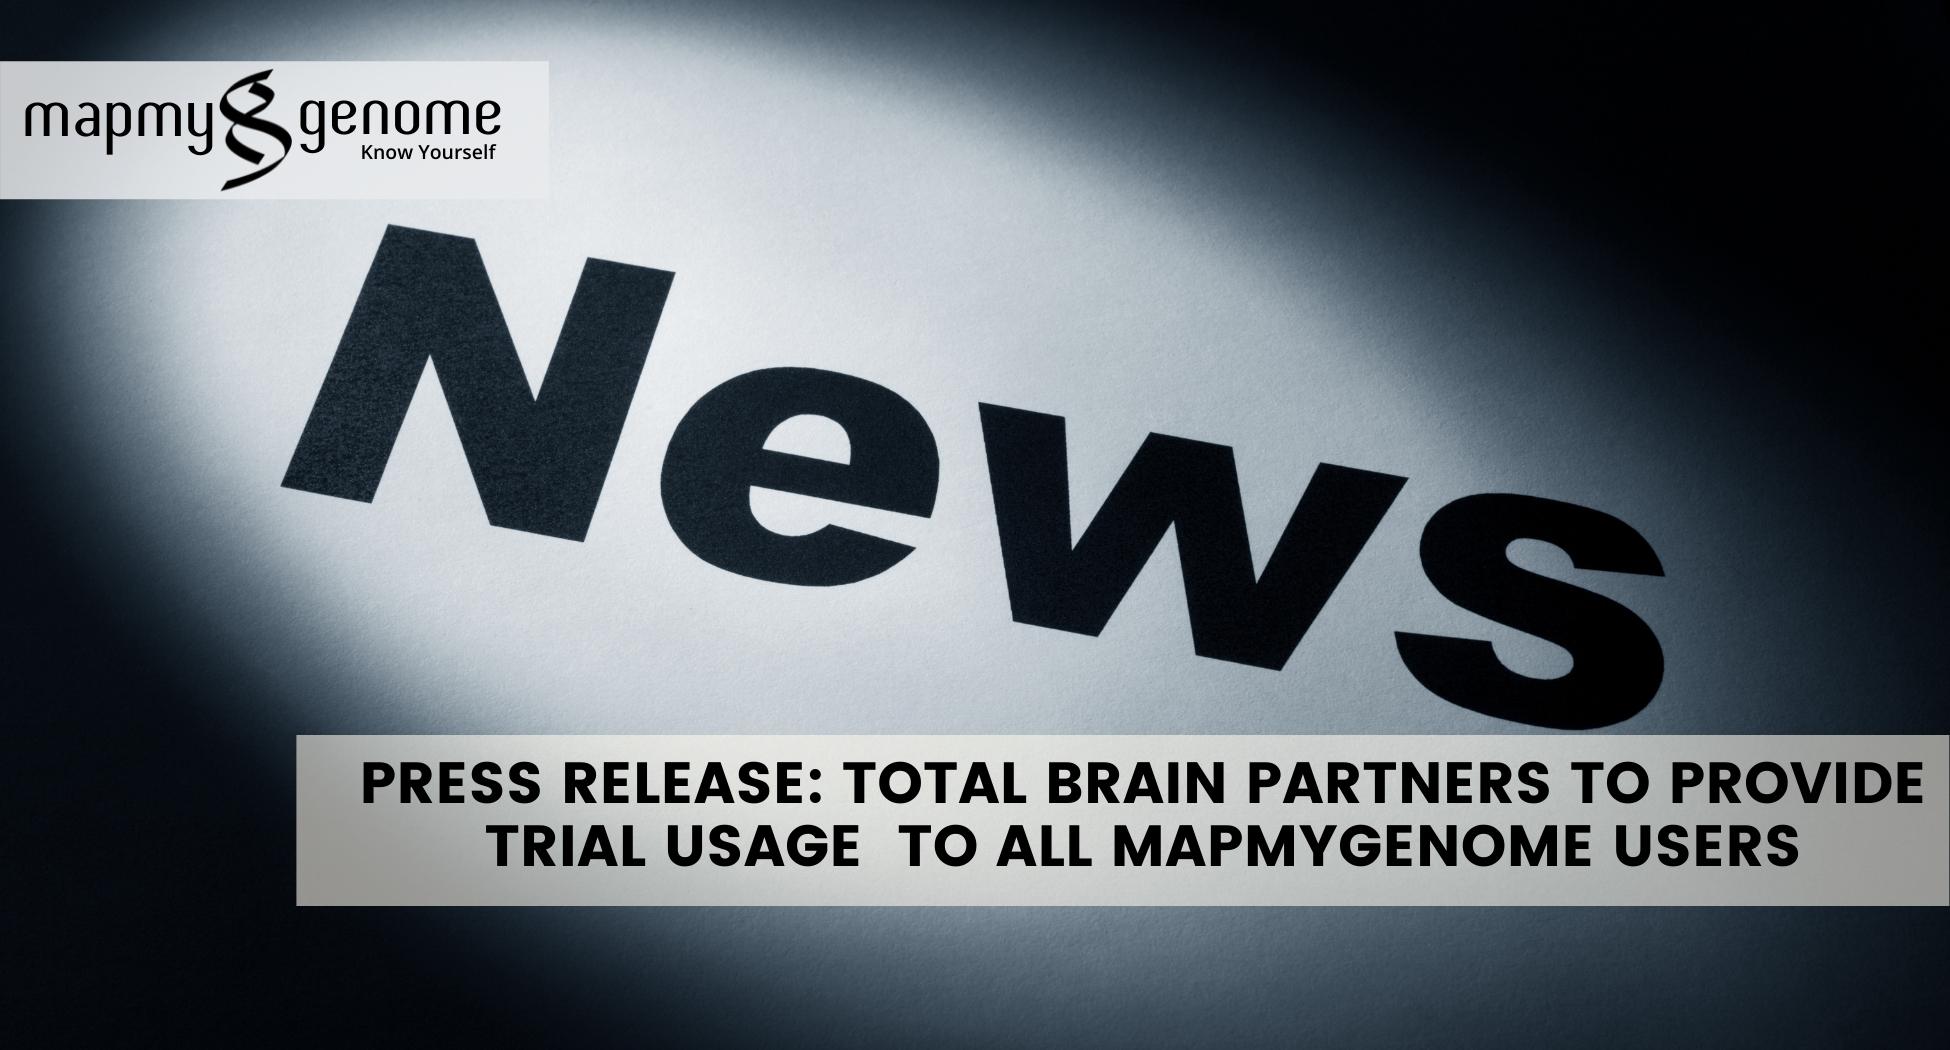 Press Release: Total Brain partners with Mapmygenome to provide trial usage of its brain optimisation platform to all Mapmygenome users